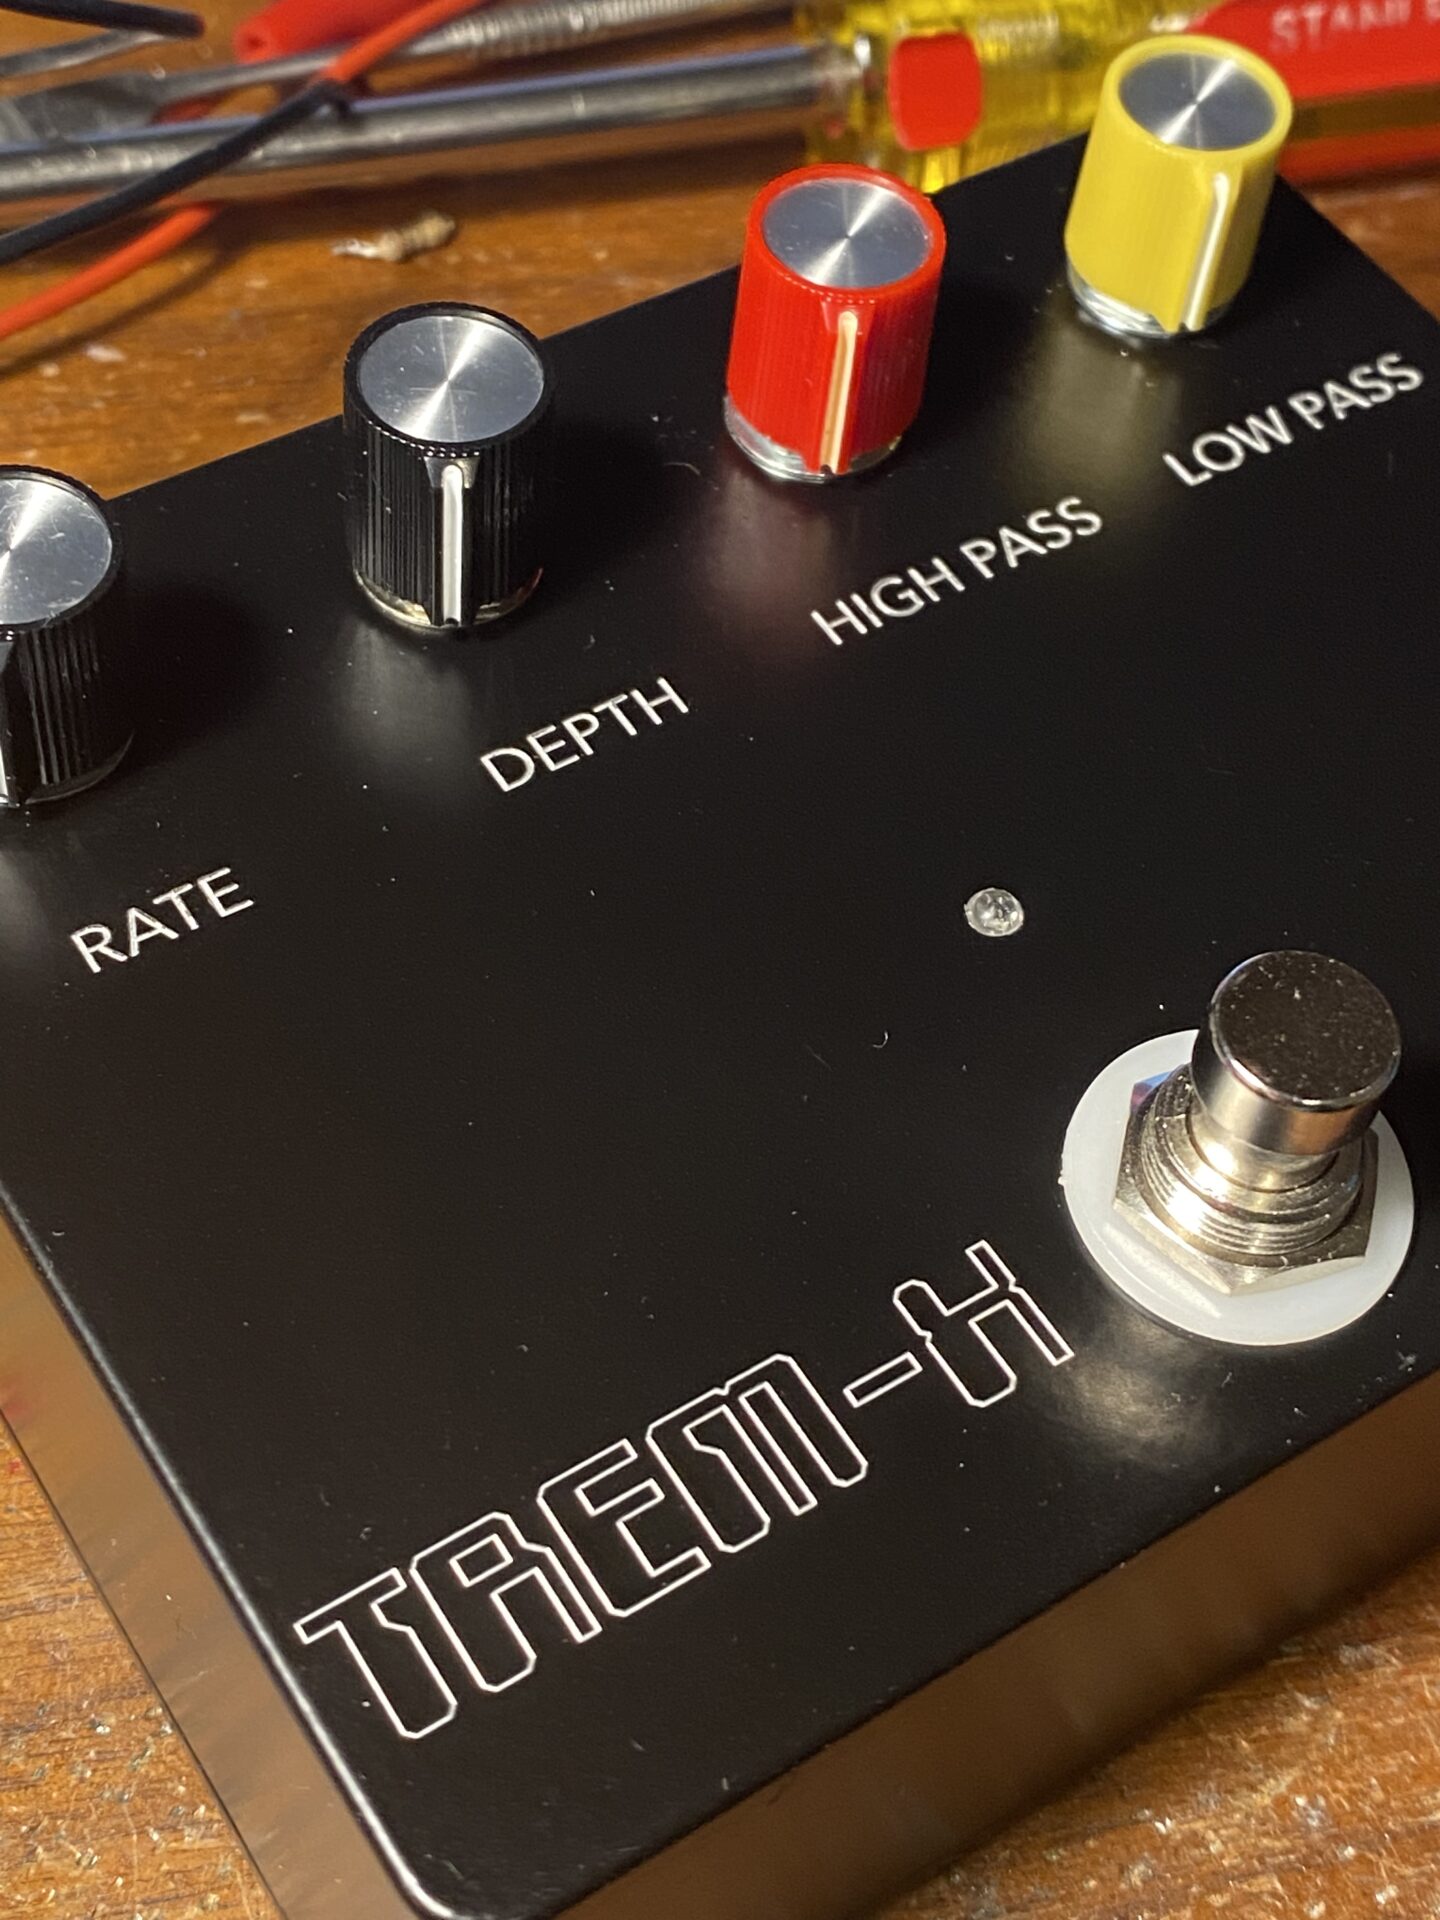 Tremolo-matic X by stompboxology